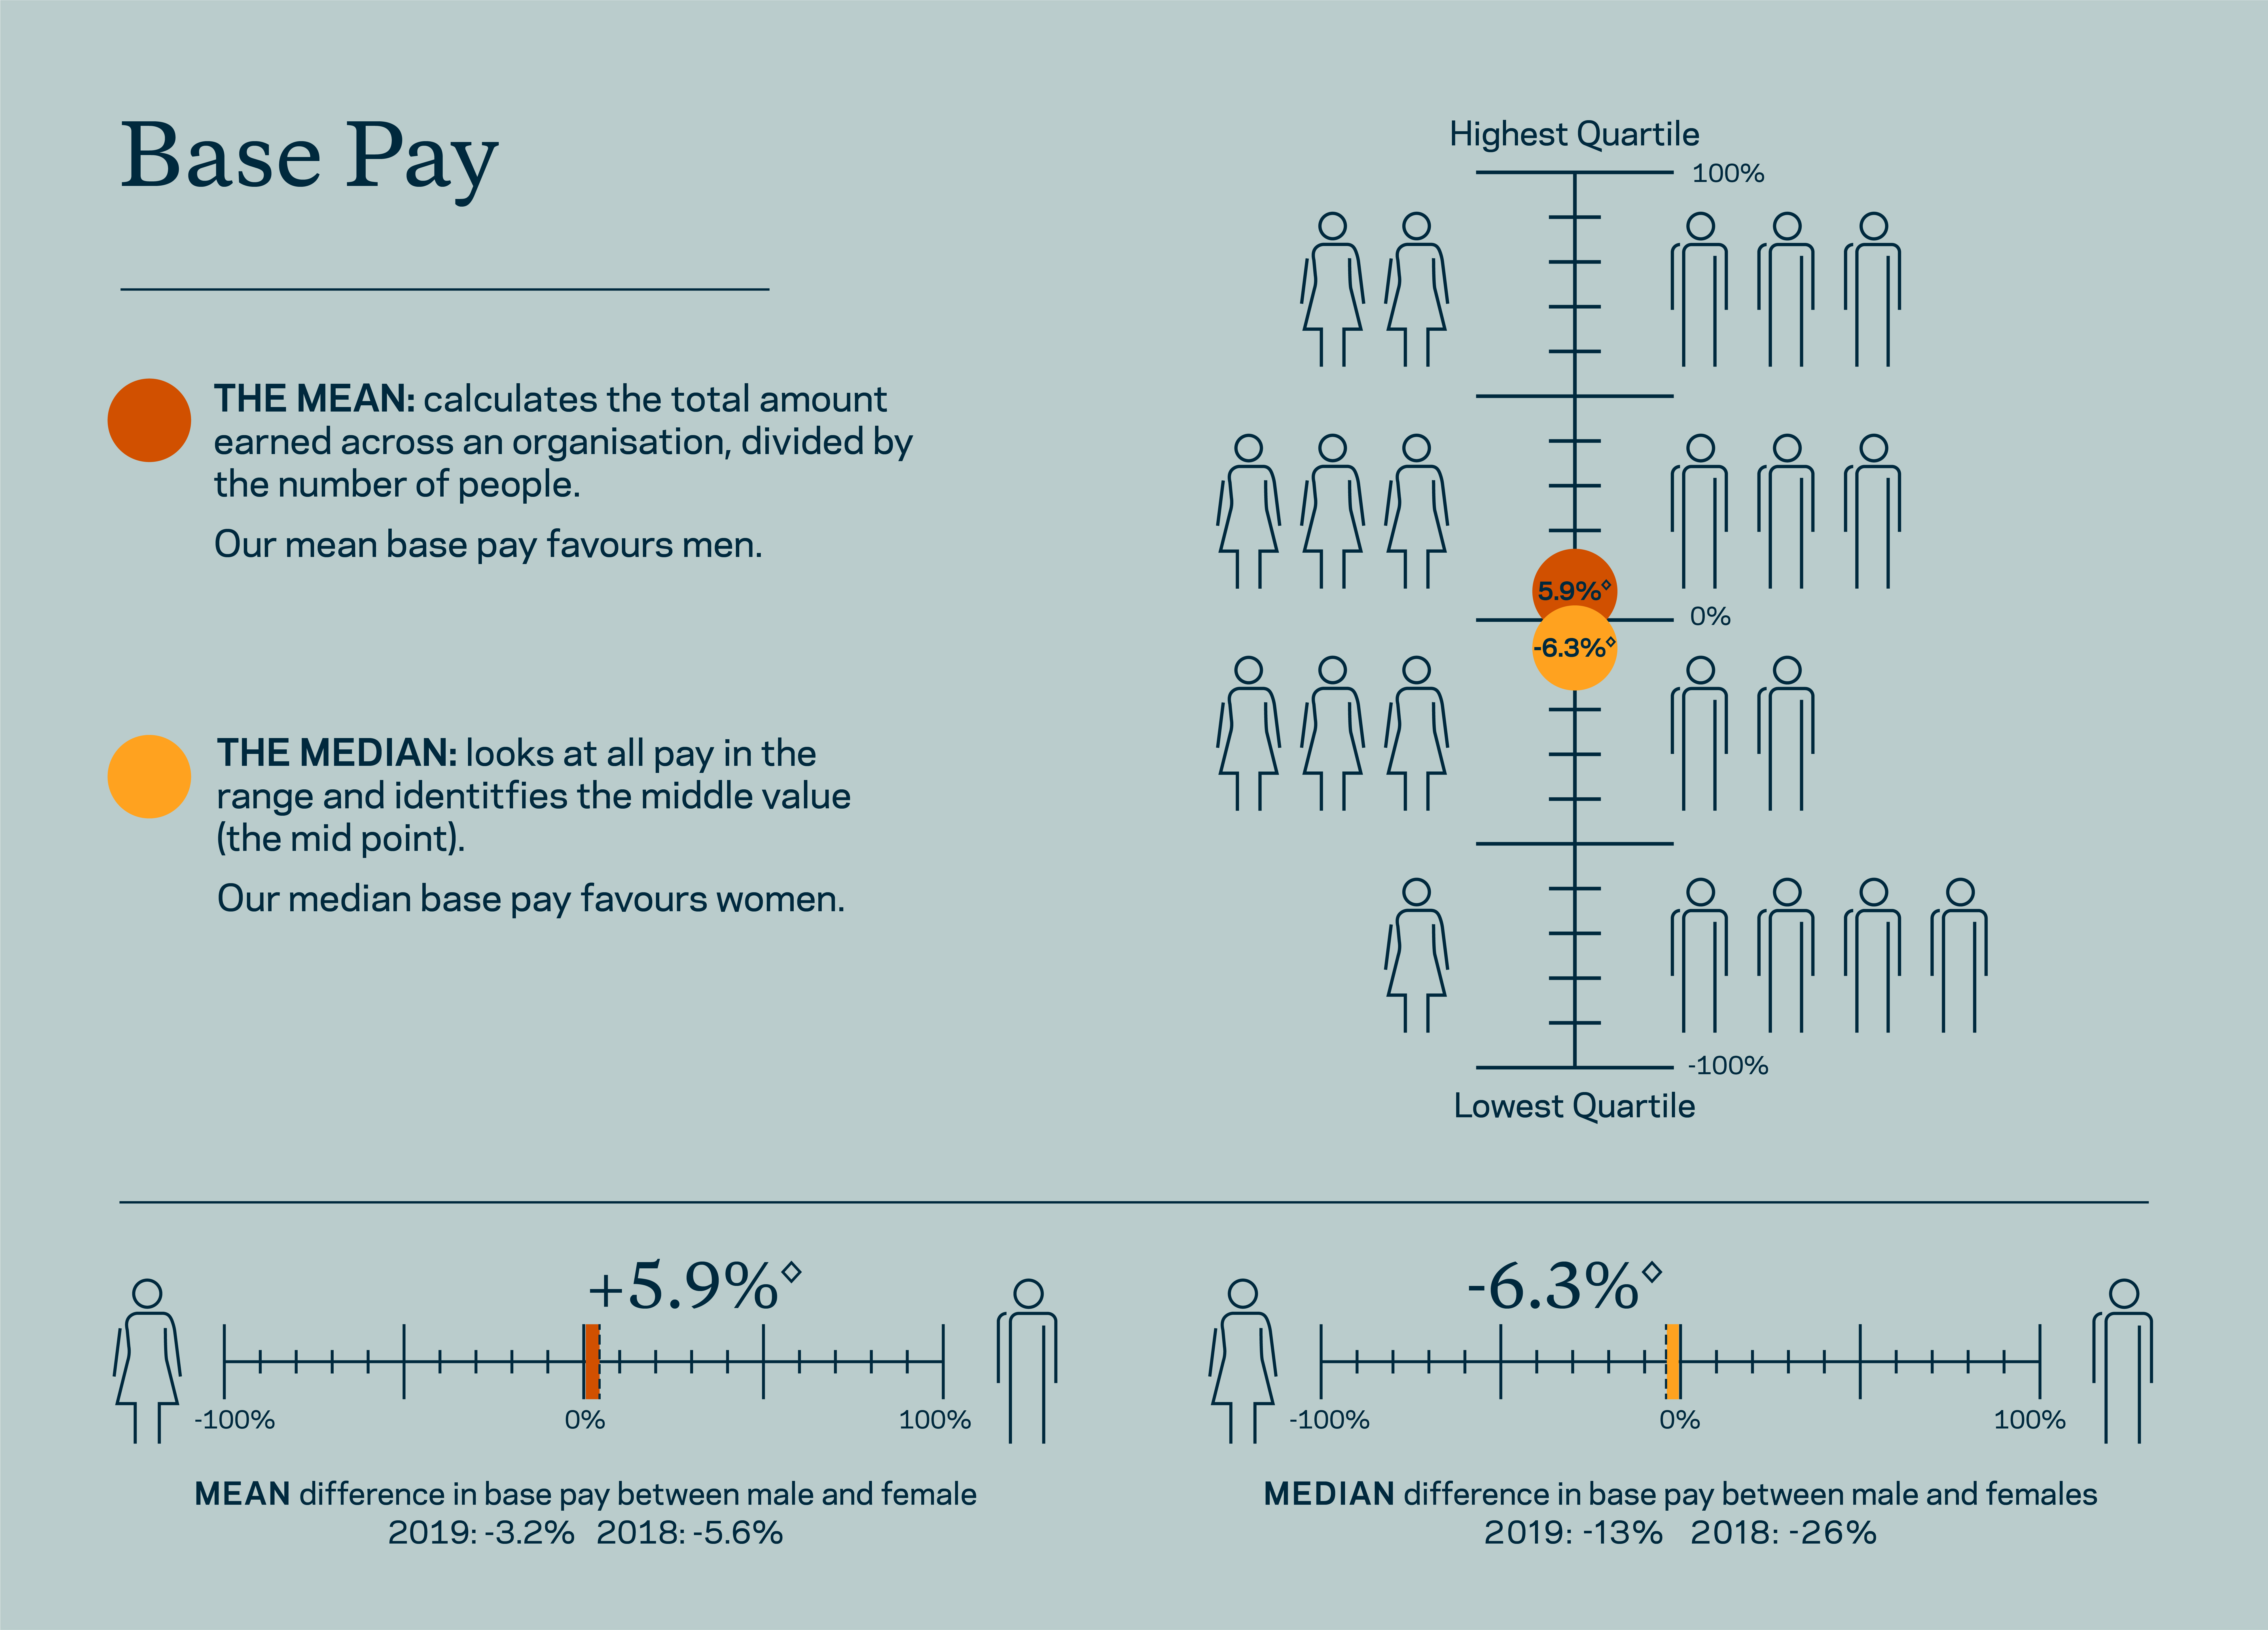 Infographic illustrating The Crown Estate's base pay gap on a scale 